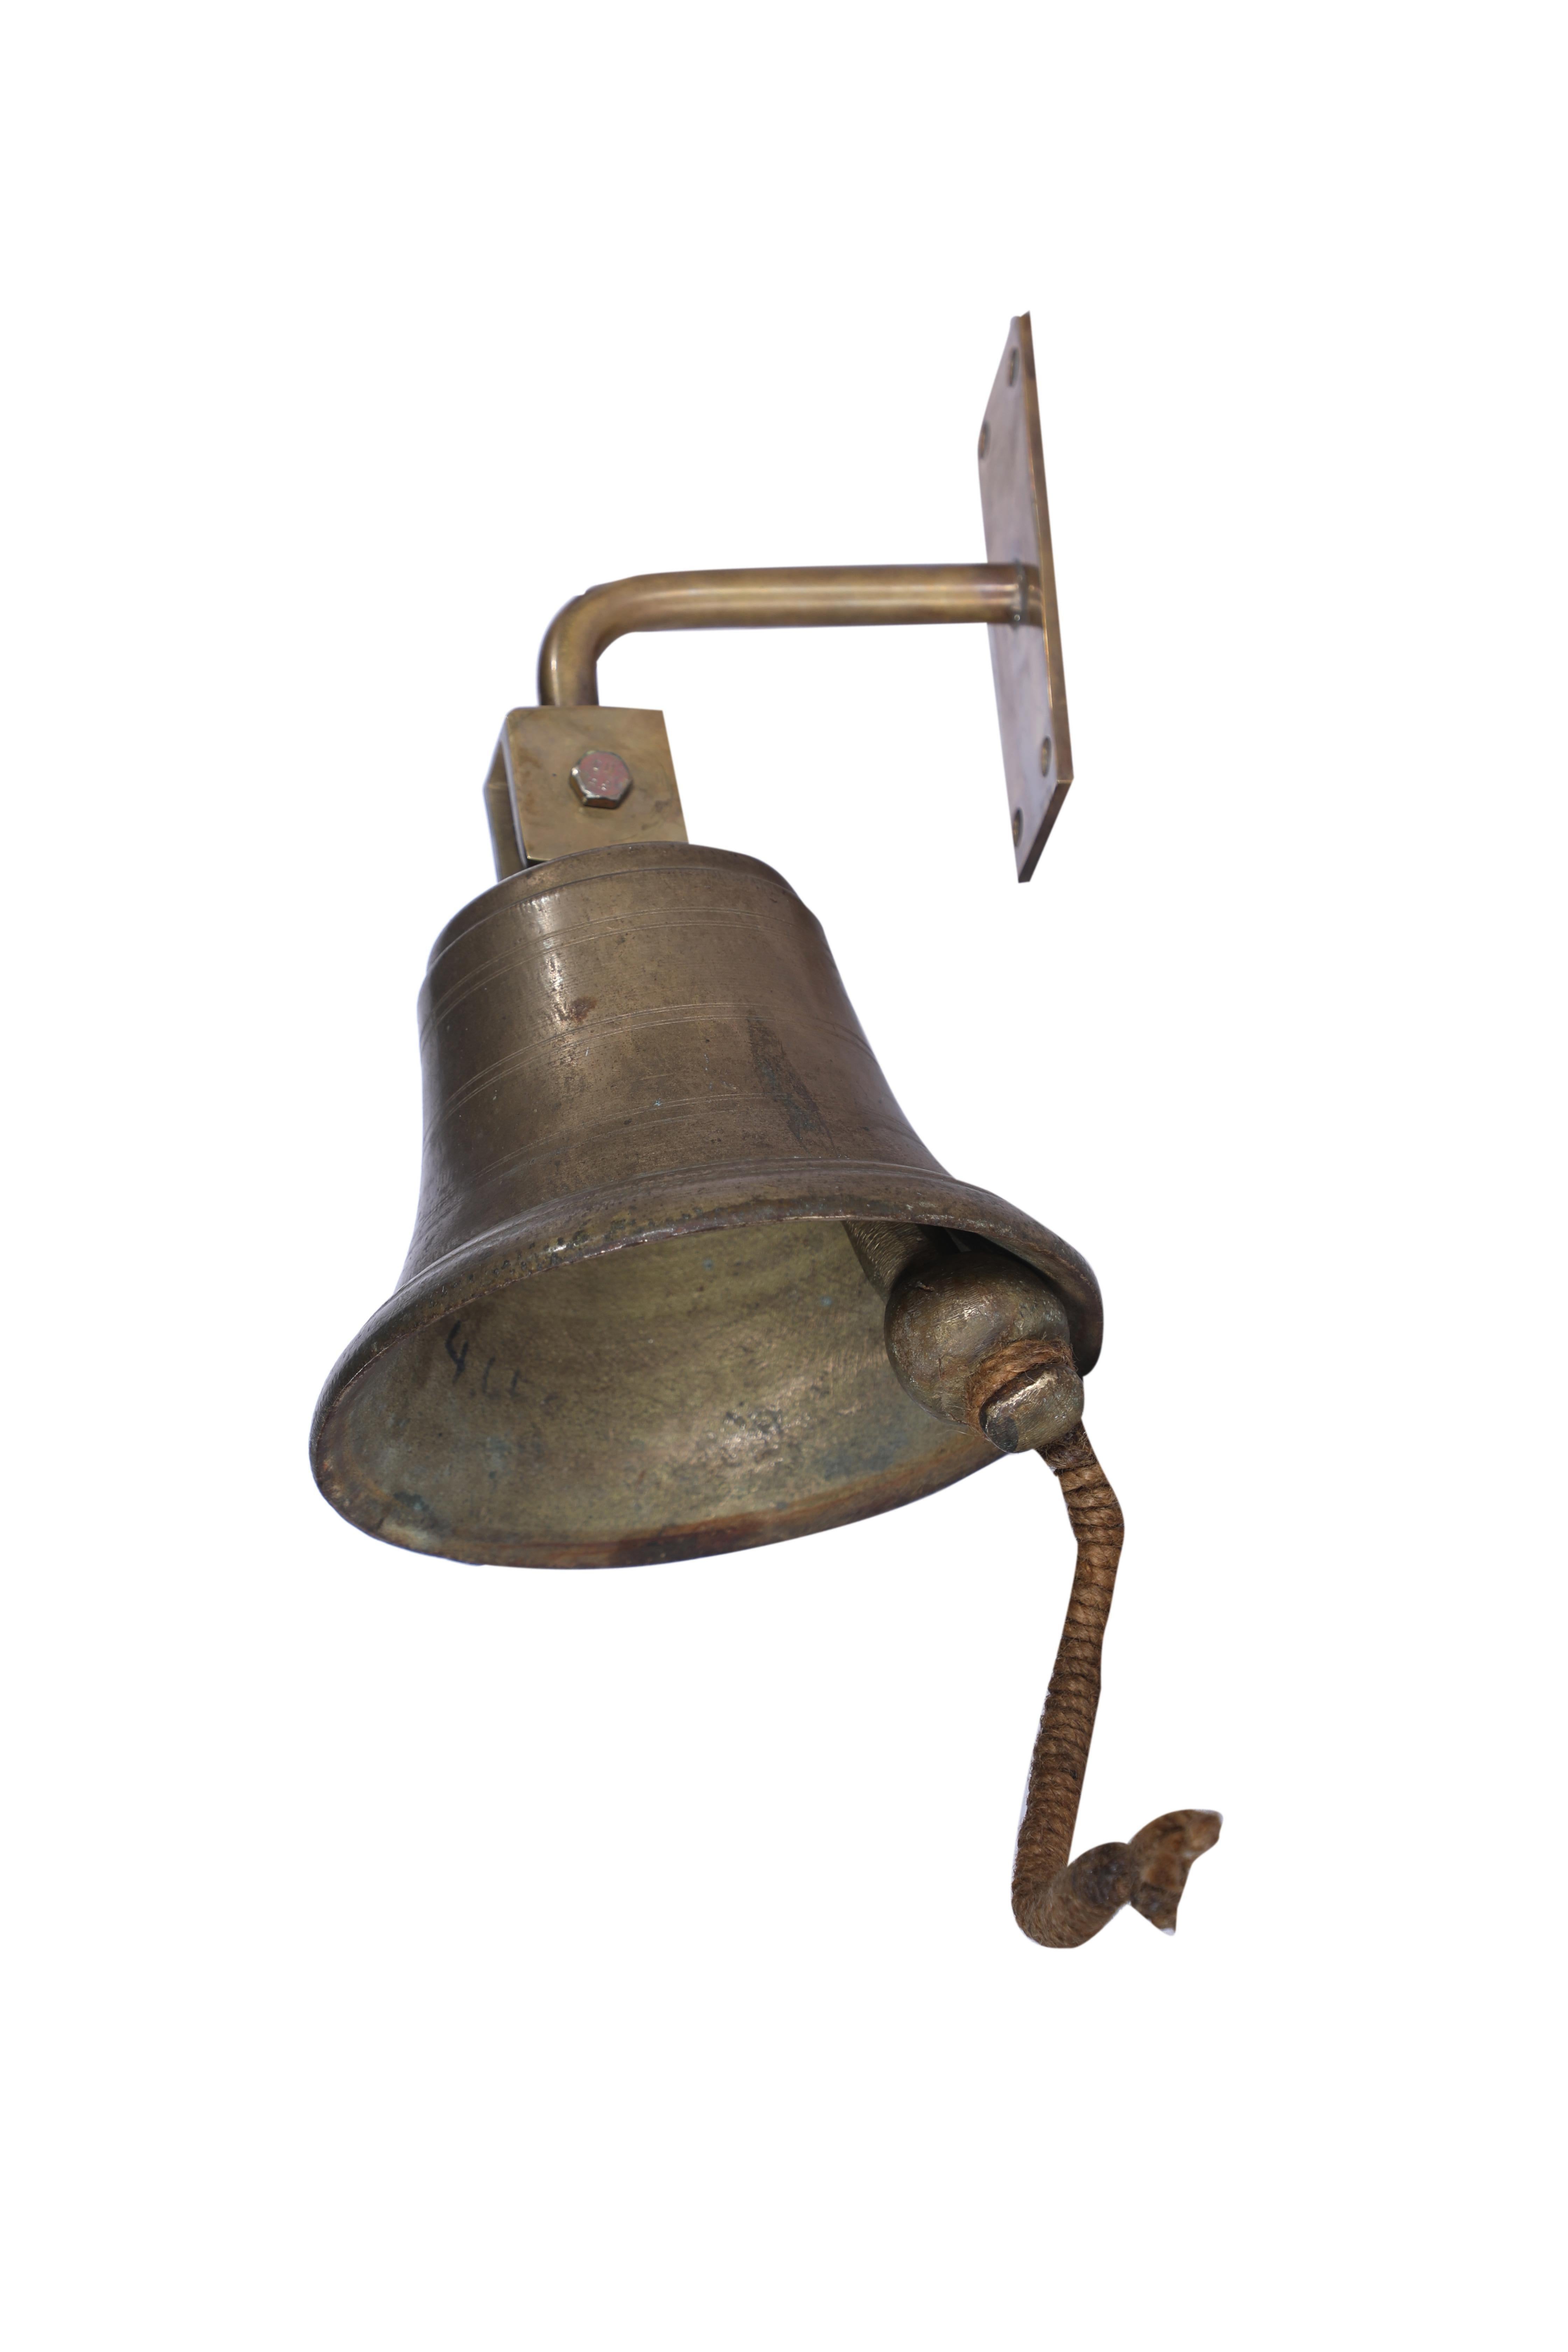 A brass bell used on a ship which was decommissioned.  It has a coiled rope pull attached to the clapper.  The brass bracket and base plate has been added  for ease of hanging and measures 2 inches x 6 inches.  Circa 1970's.  Also has a nice ring.